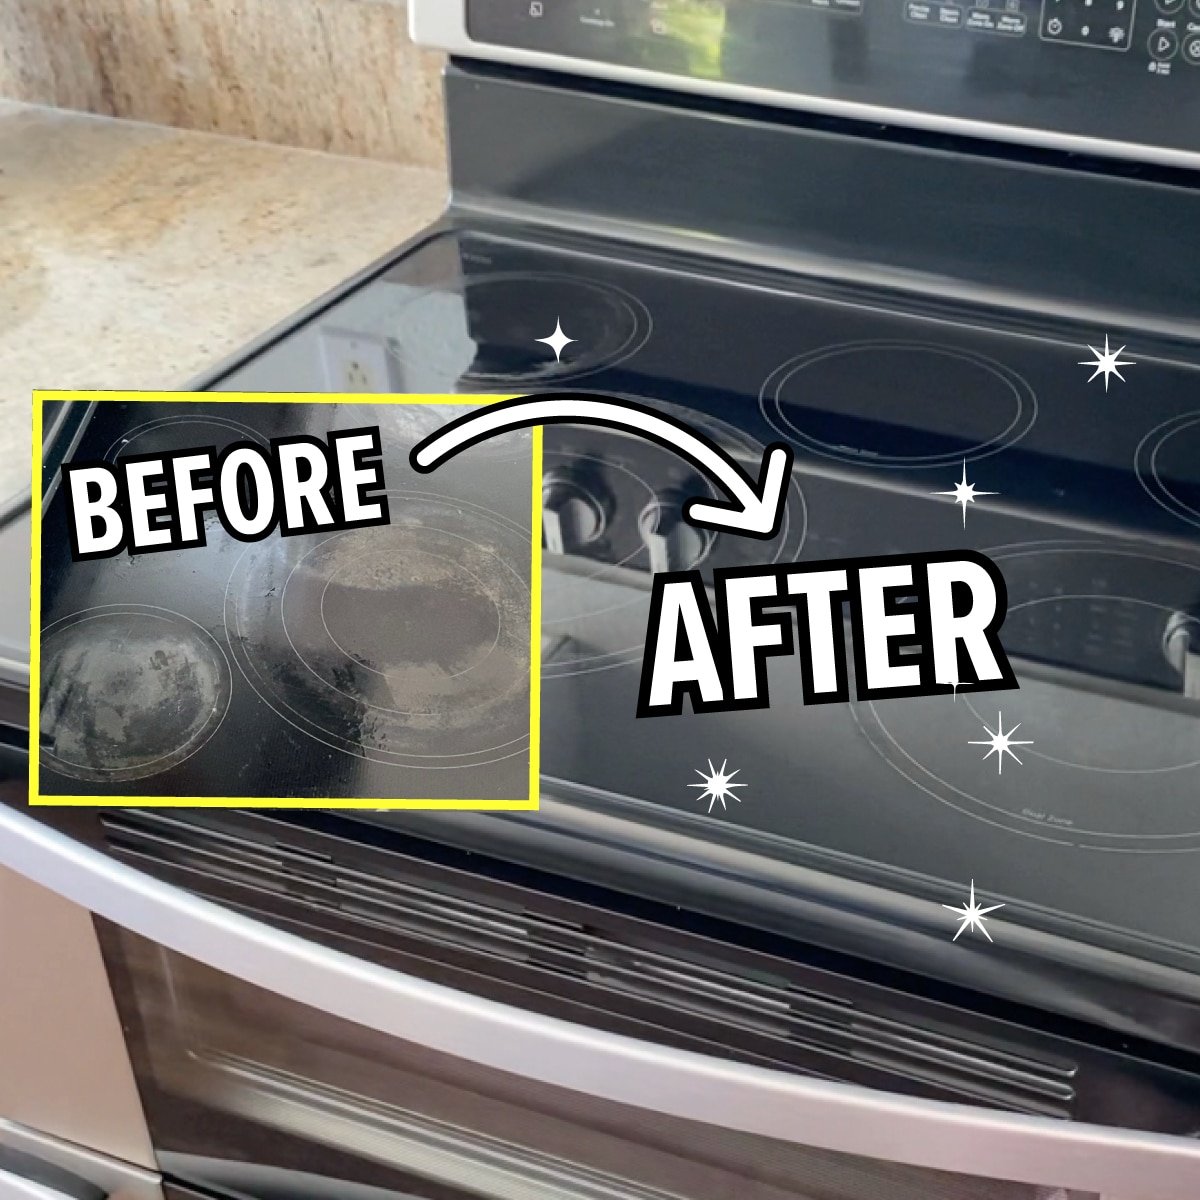 Scrub Away Burnt-On Food: Glass Pan Cleaning Made Easy!